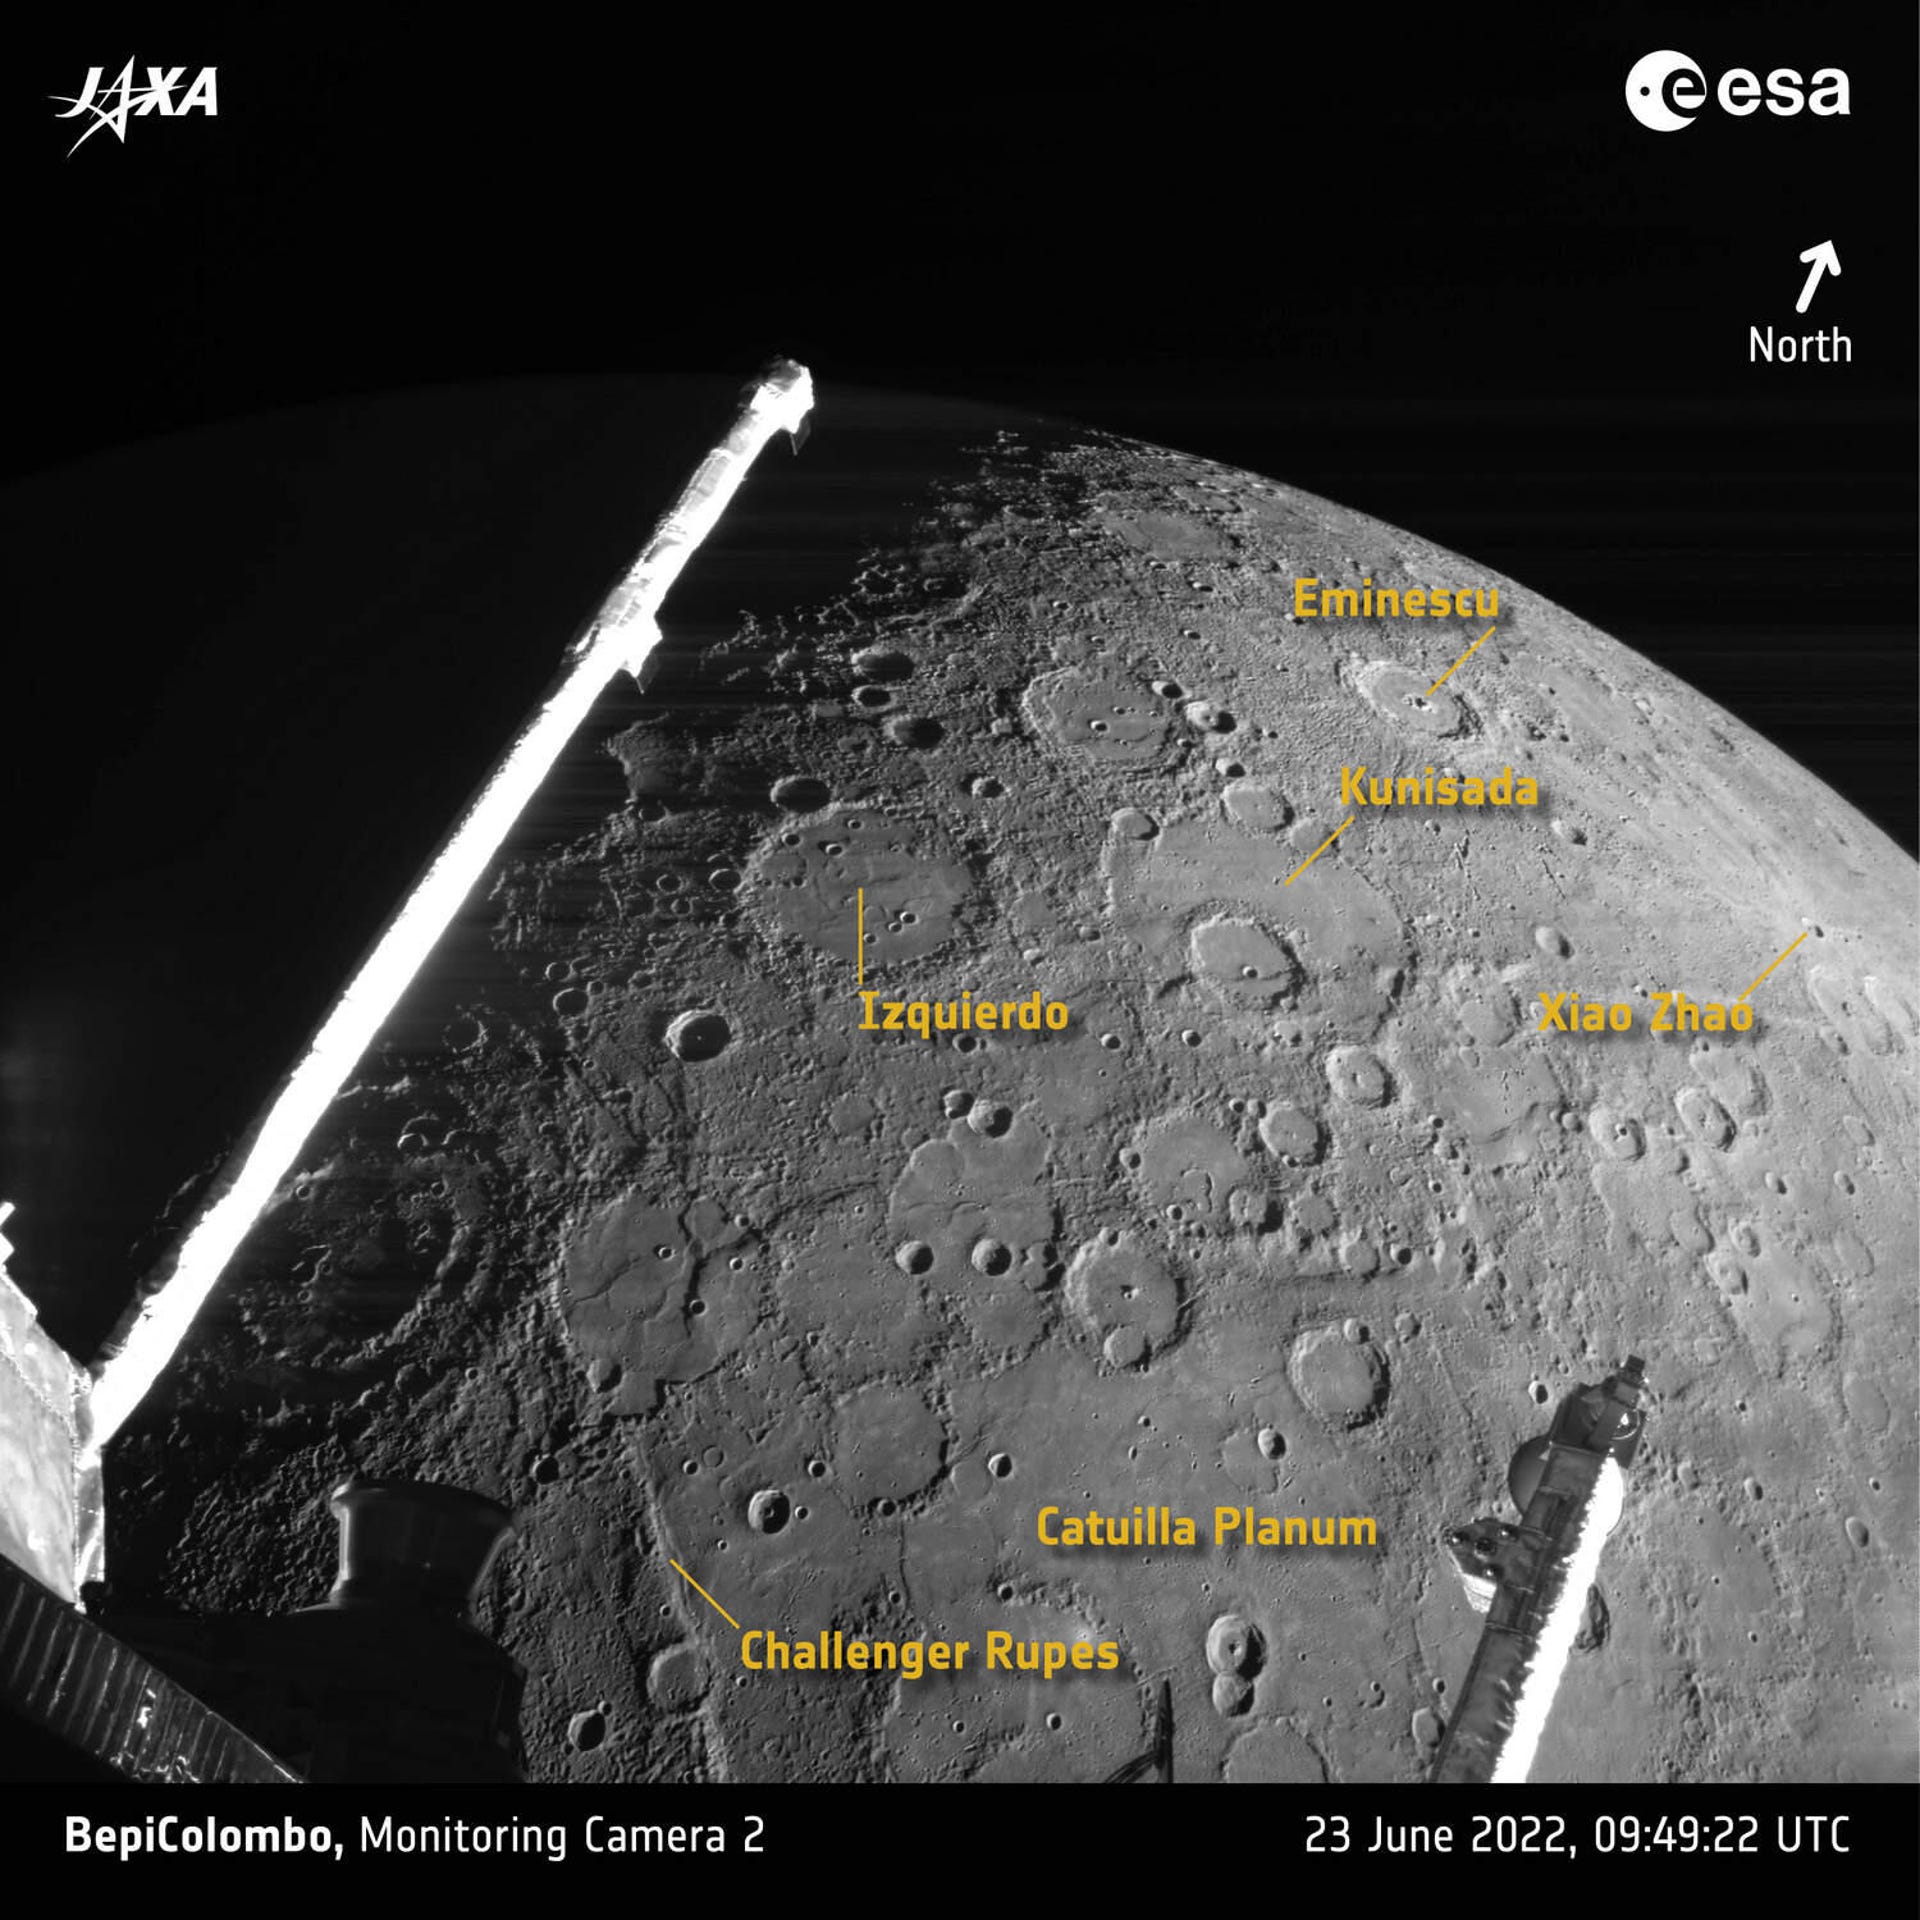 Annotated black and white view of Mercury with many of the craters and features labeled in yellow.